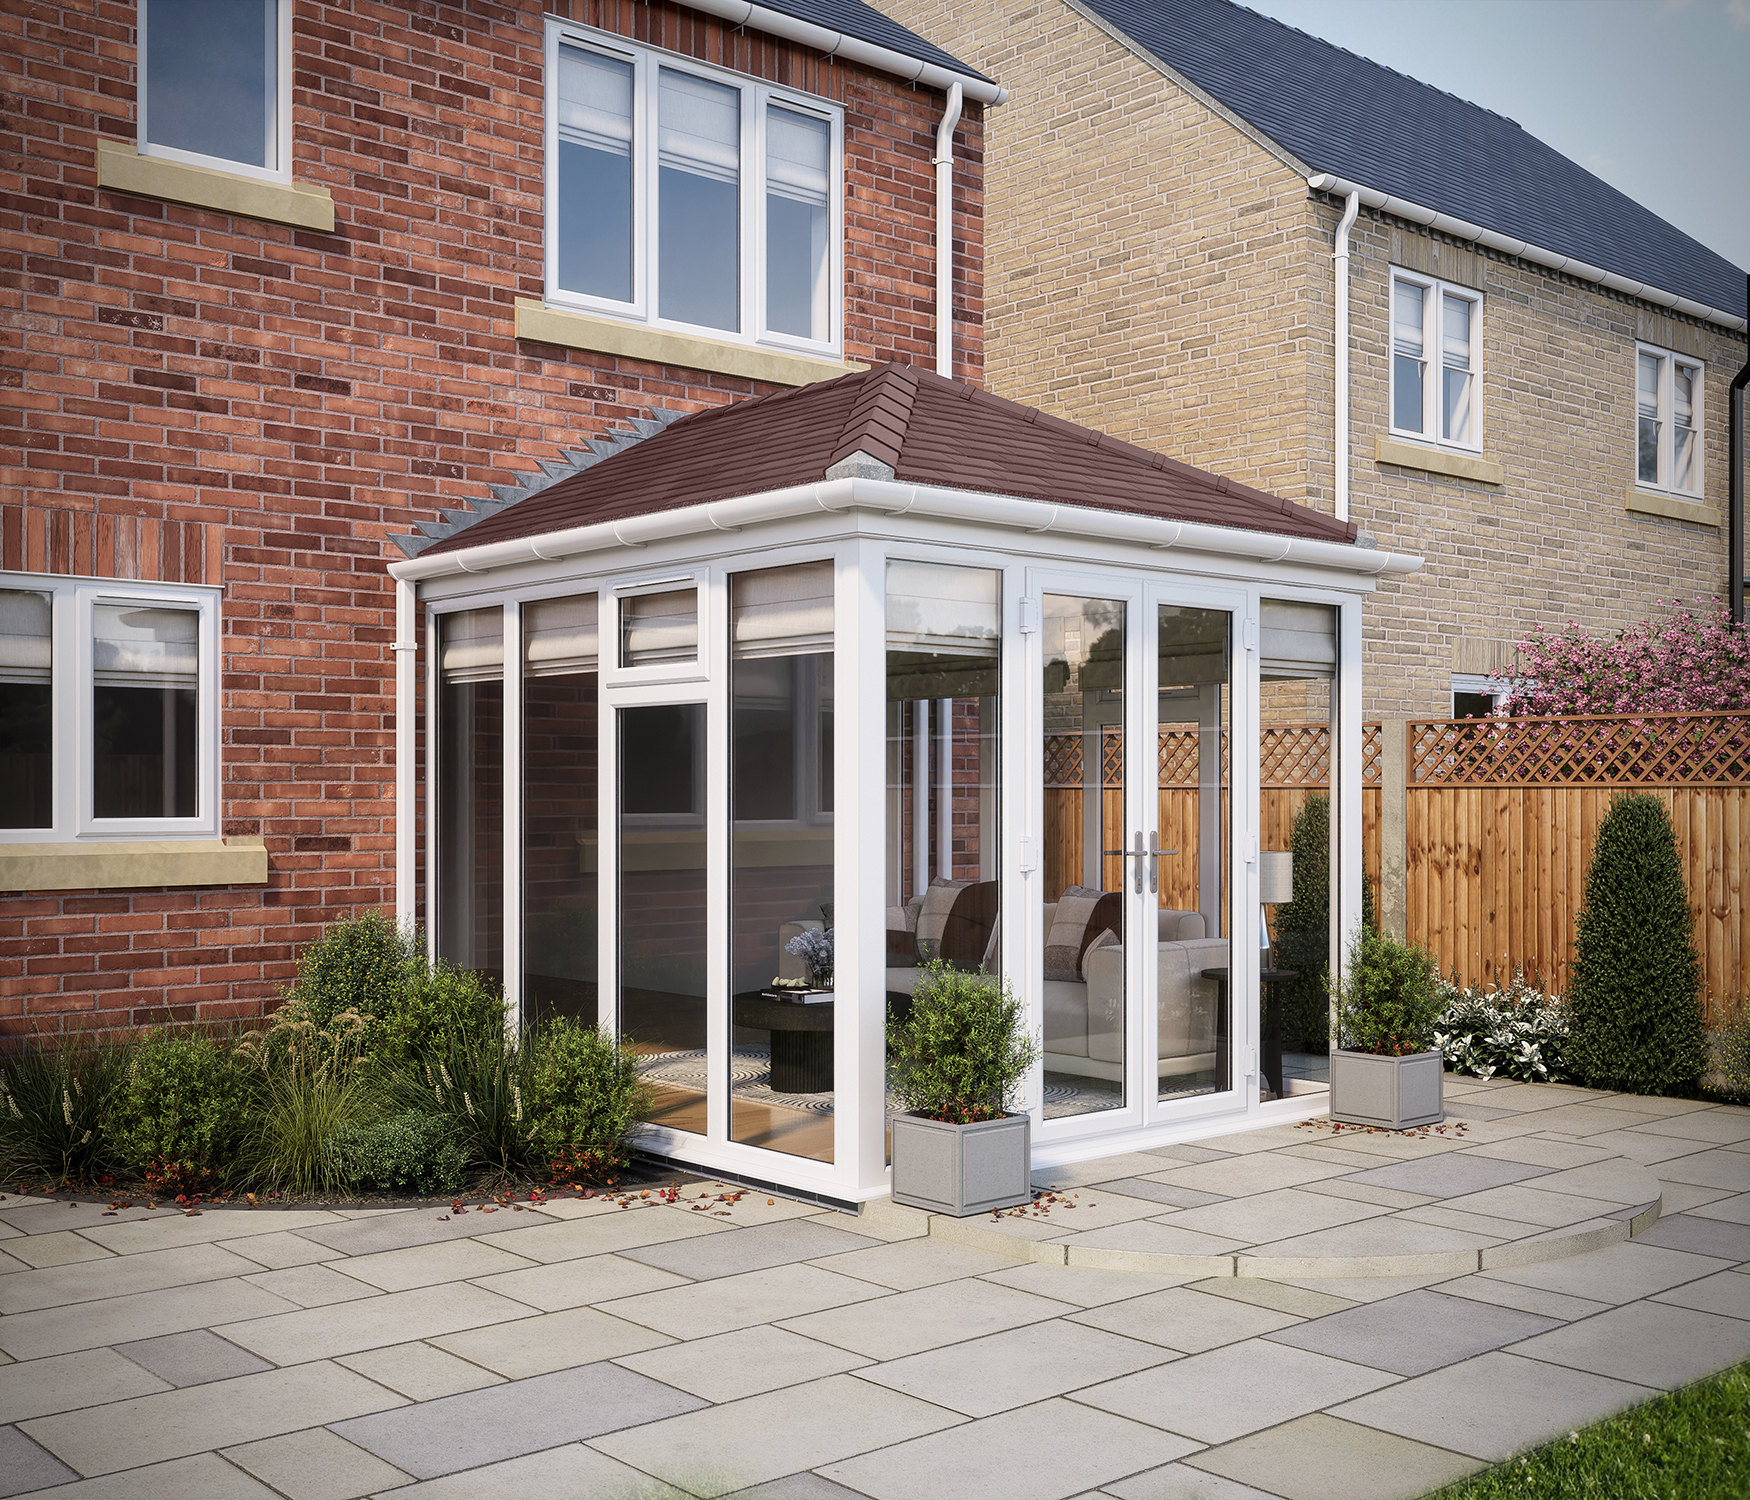 Image of SOLid Roof Full Height Edwardian Conservatory White Frames with Rustic Brown Tiles - 10 x 10ft